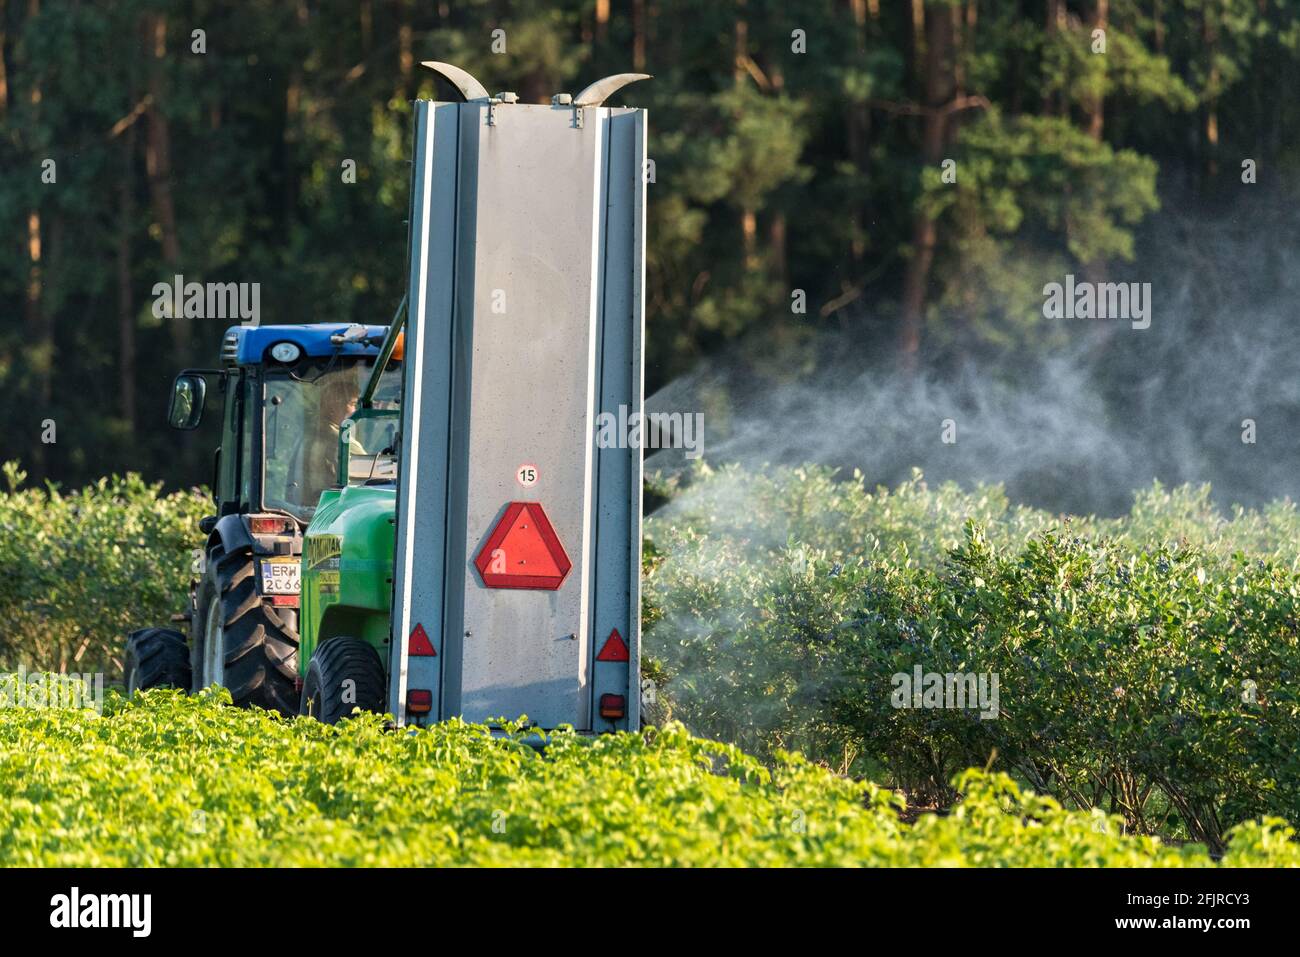 Rawa Mazowiecka, Poland - July 18, 2020: Spraying cherries. Protection of the orchard and trees against pests and diseases. Work on a fruit farm. Stock Photo